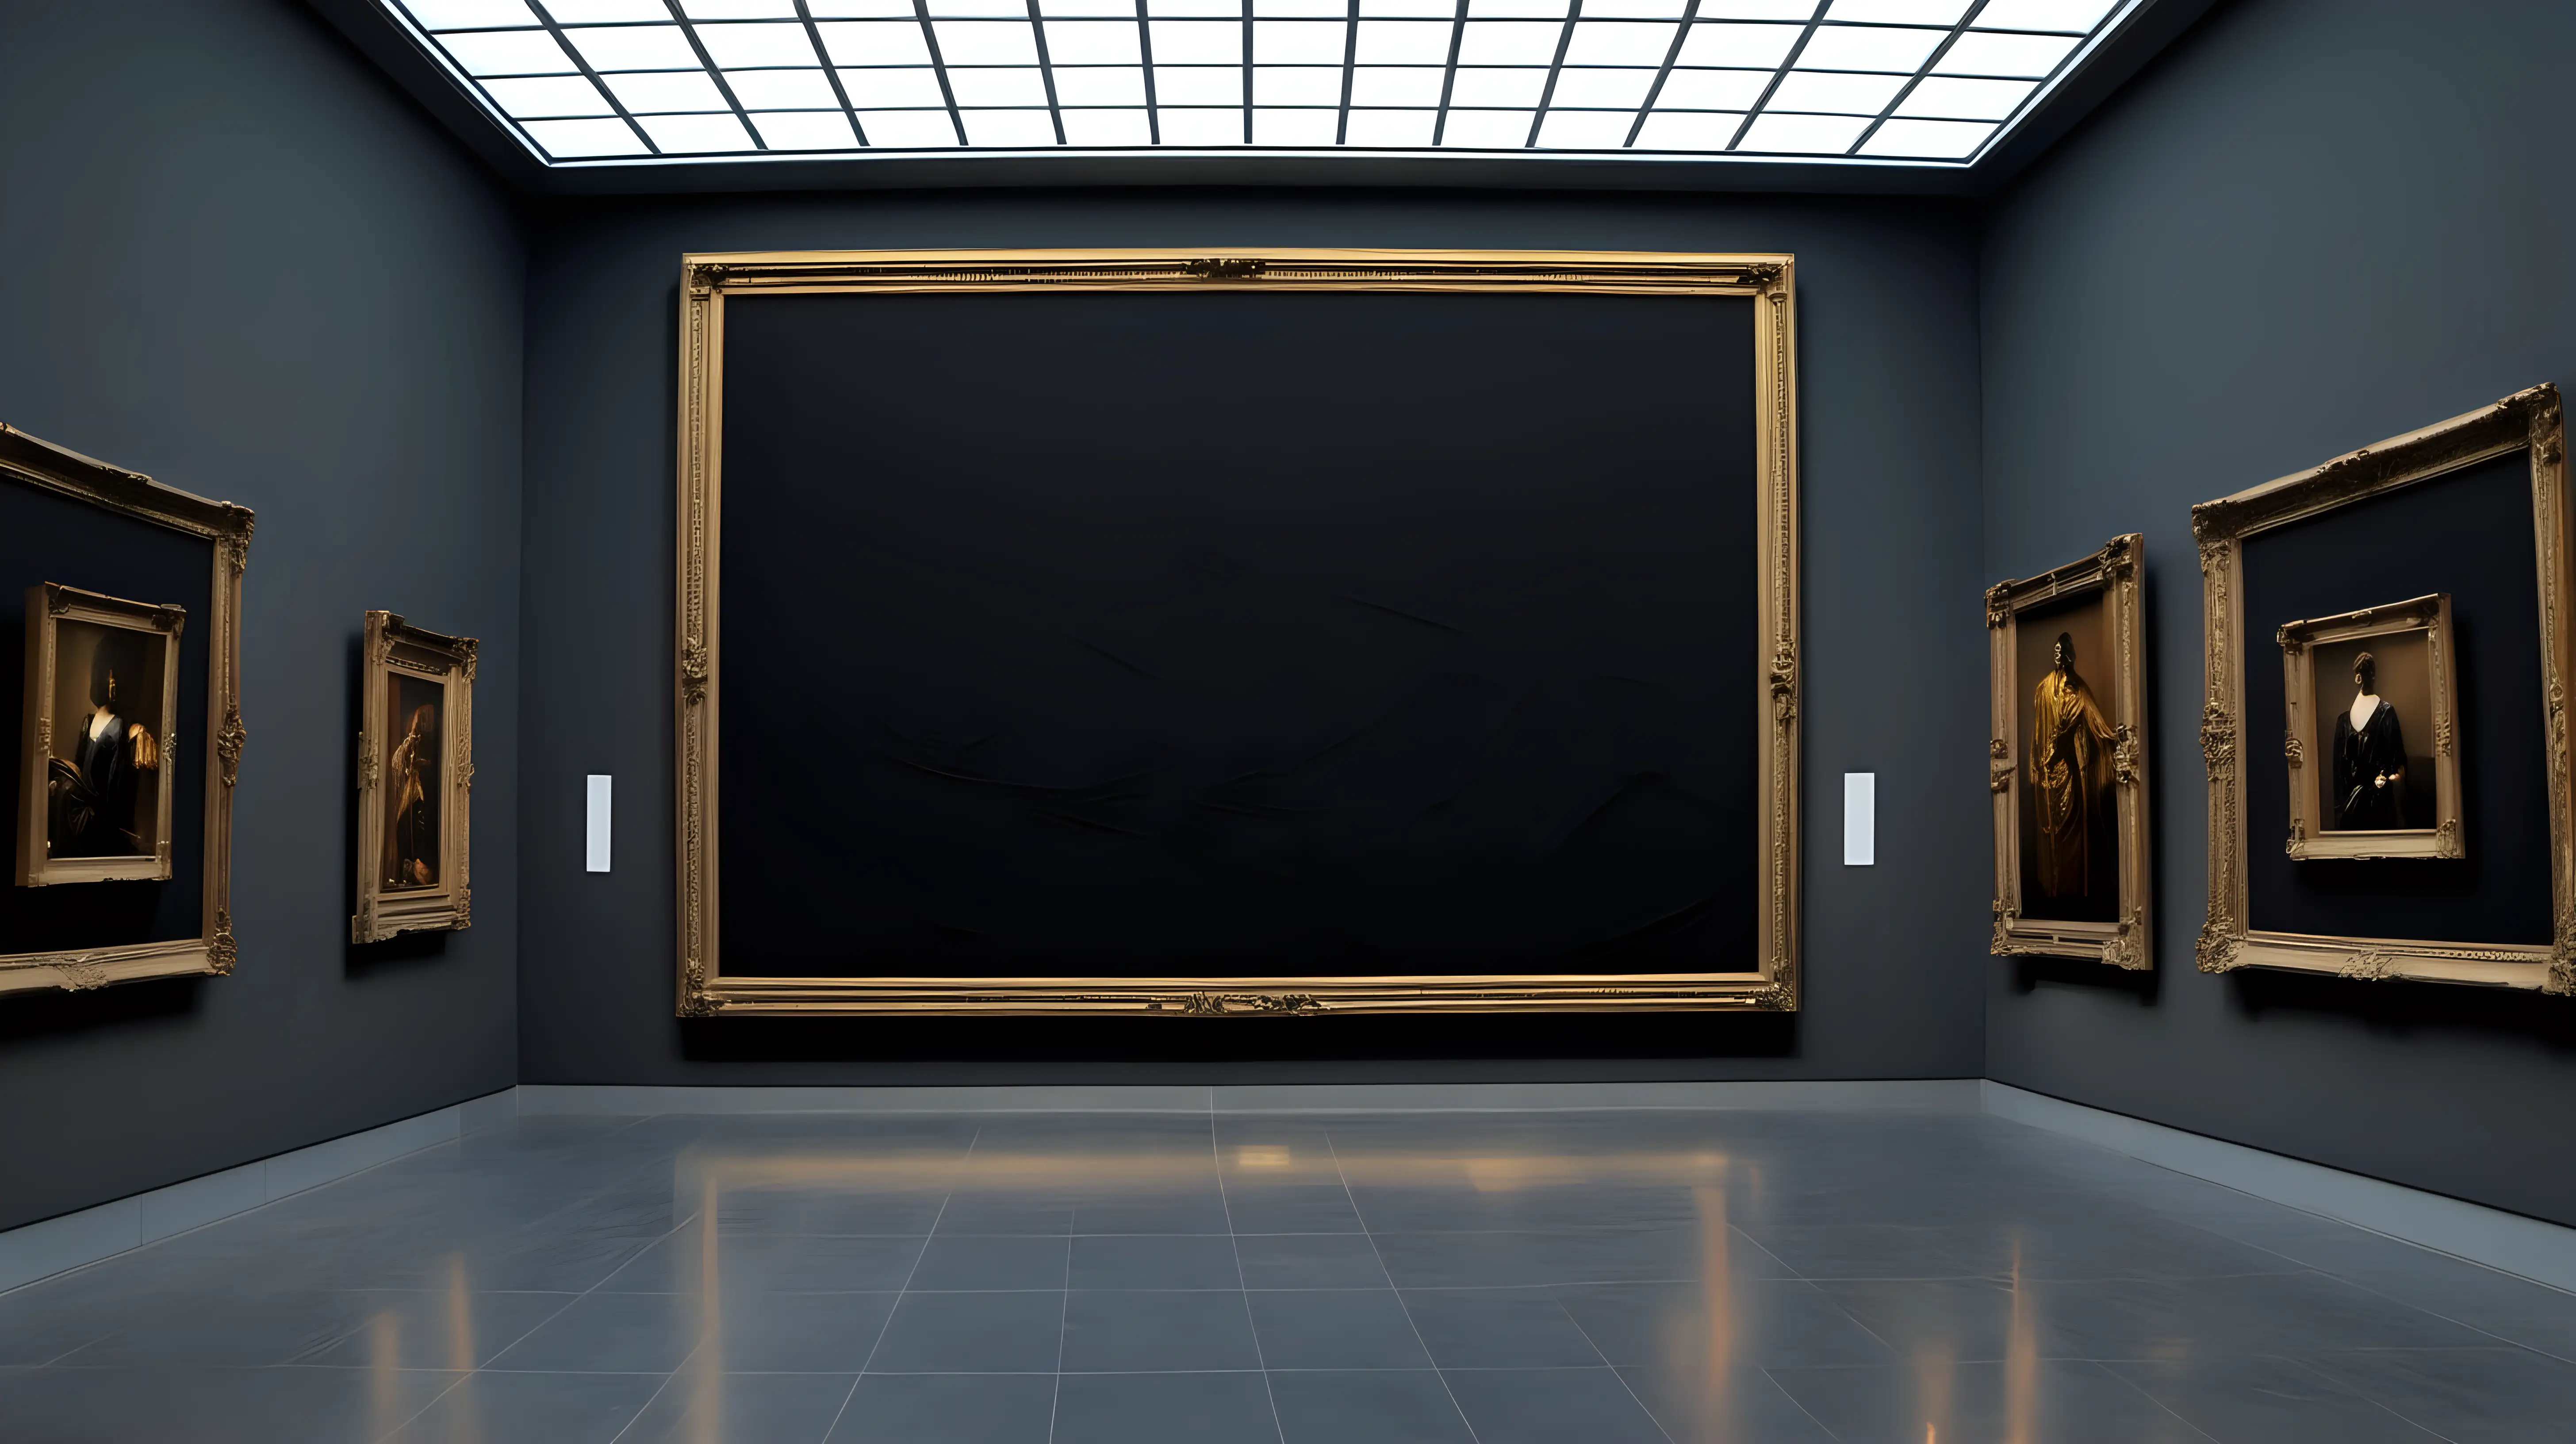 Contemporary Art Museum Featuring Striking GoldFramed Black Canvas